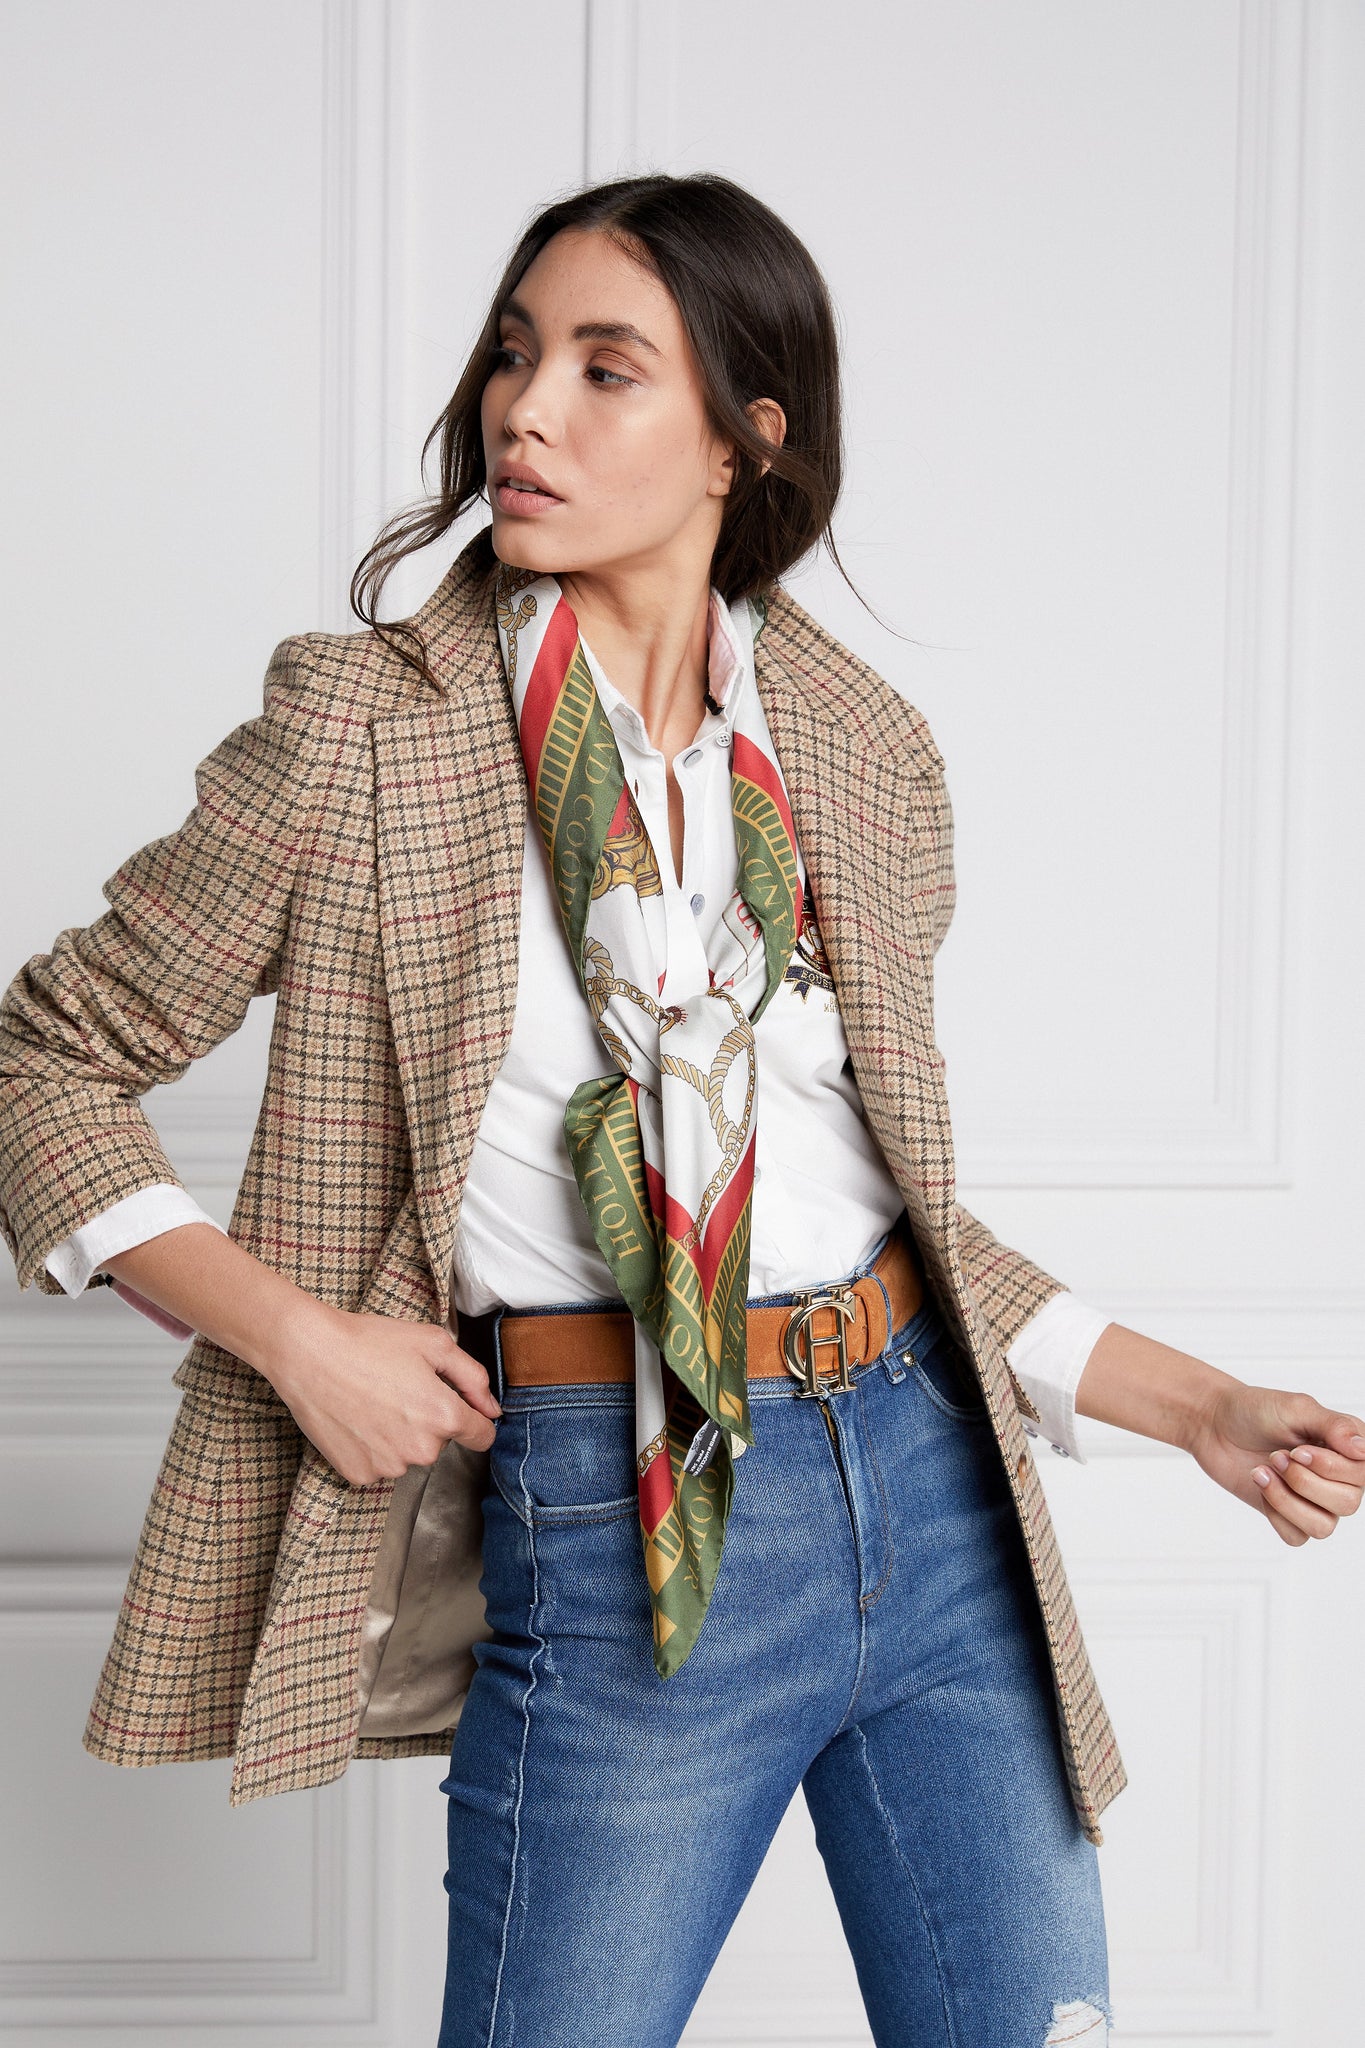 womens classic slim fit single breasted blazer in camel black and red with lower patch pockets with concealed button flap and horn button finish on cuffs and front  worn with a white shirts classic indigo distressed jeans and green and red printed silk scarf